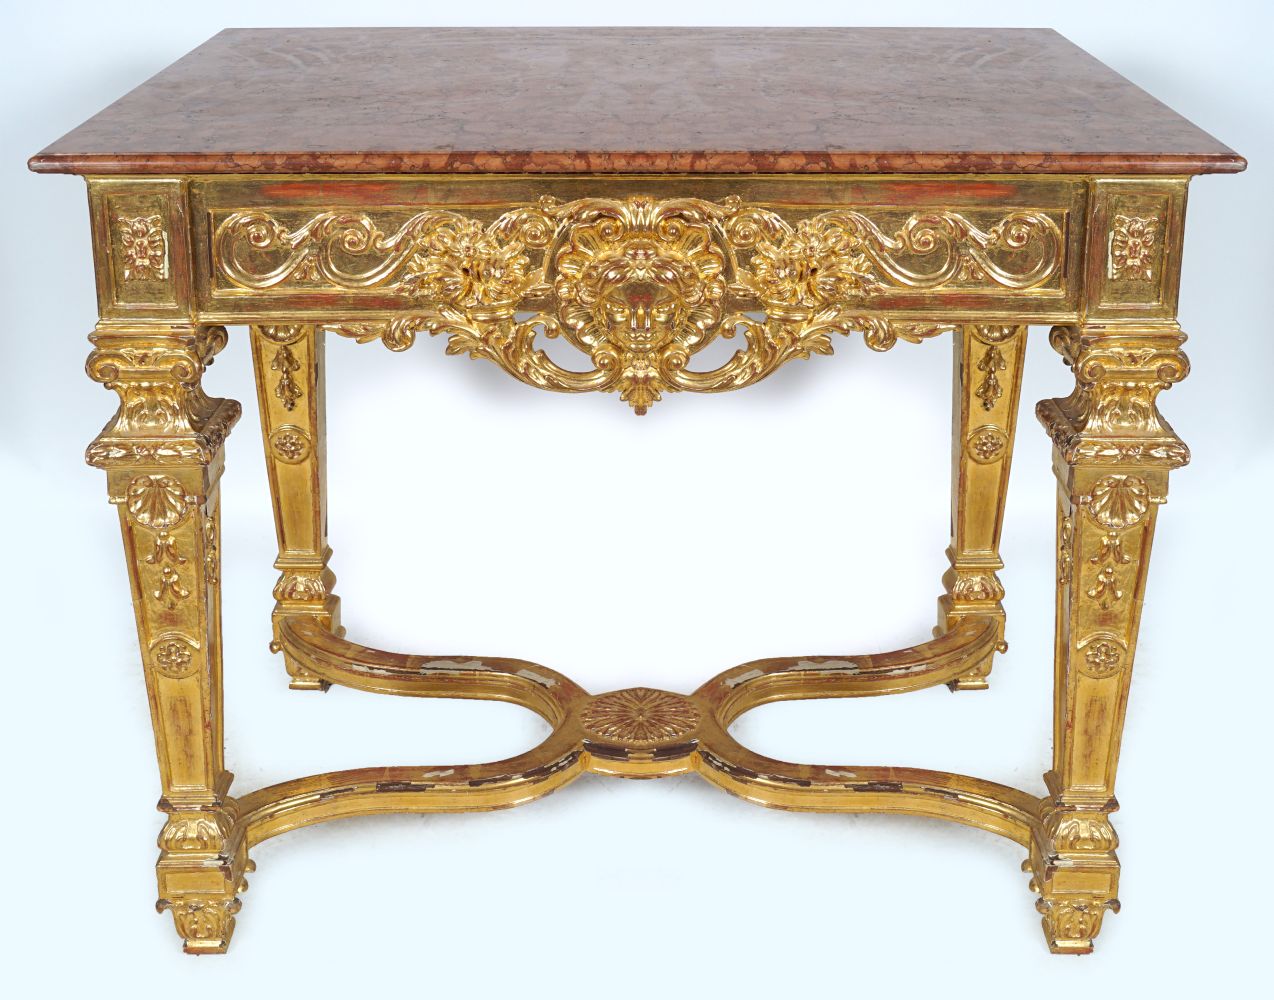 19TH-CENTURY CARVED GILTWOOD CONSOLE TABLE